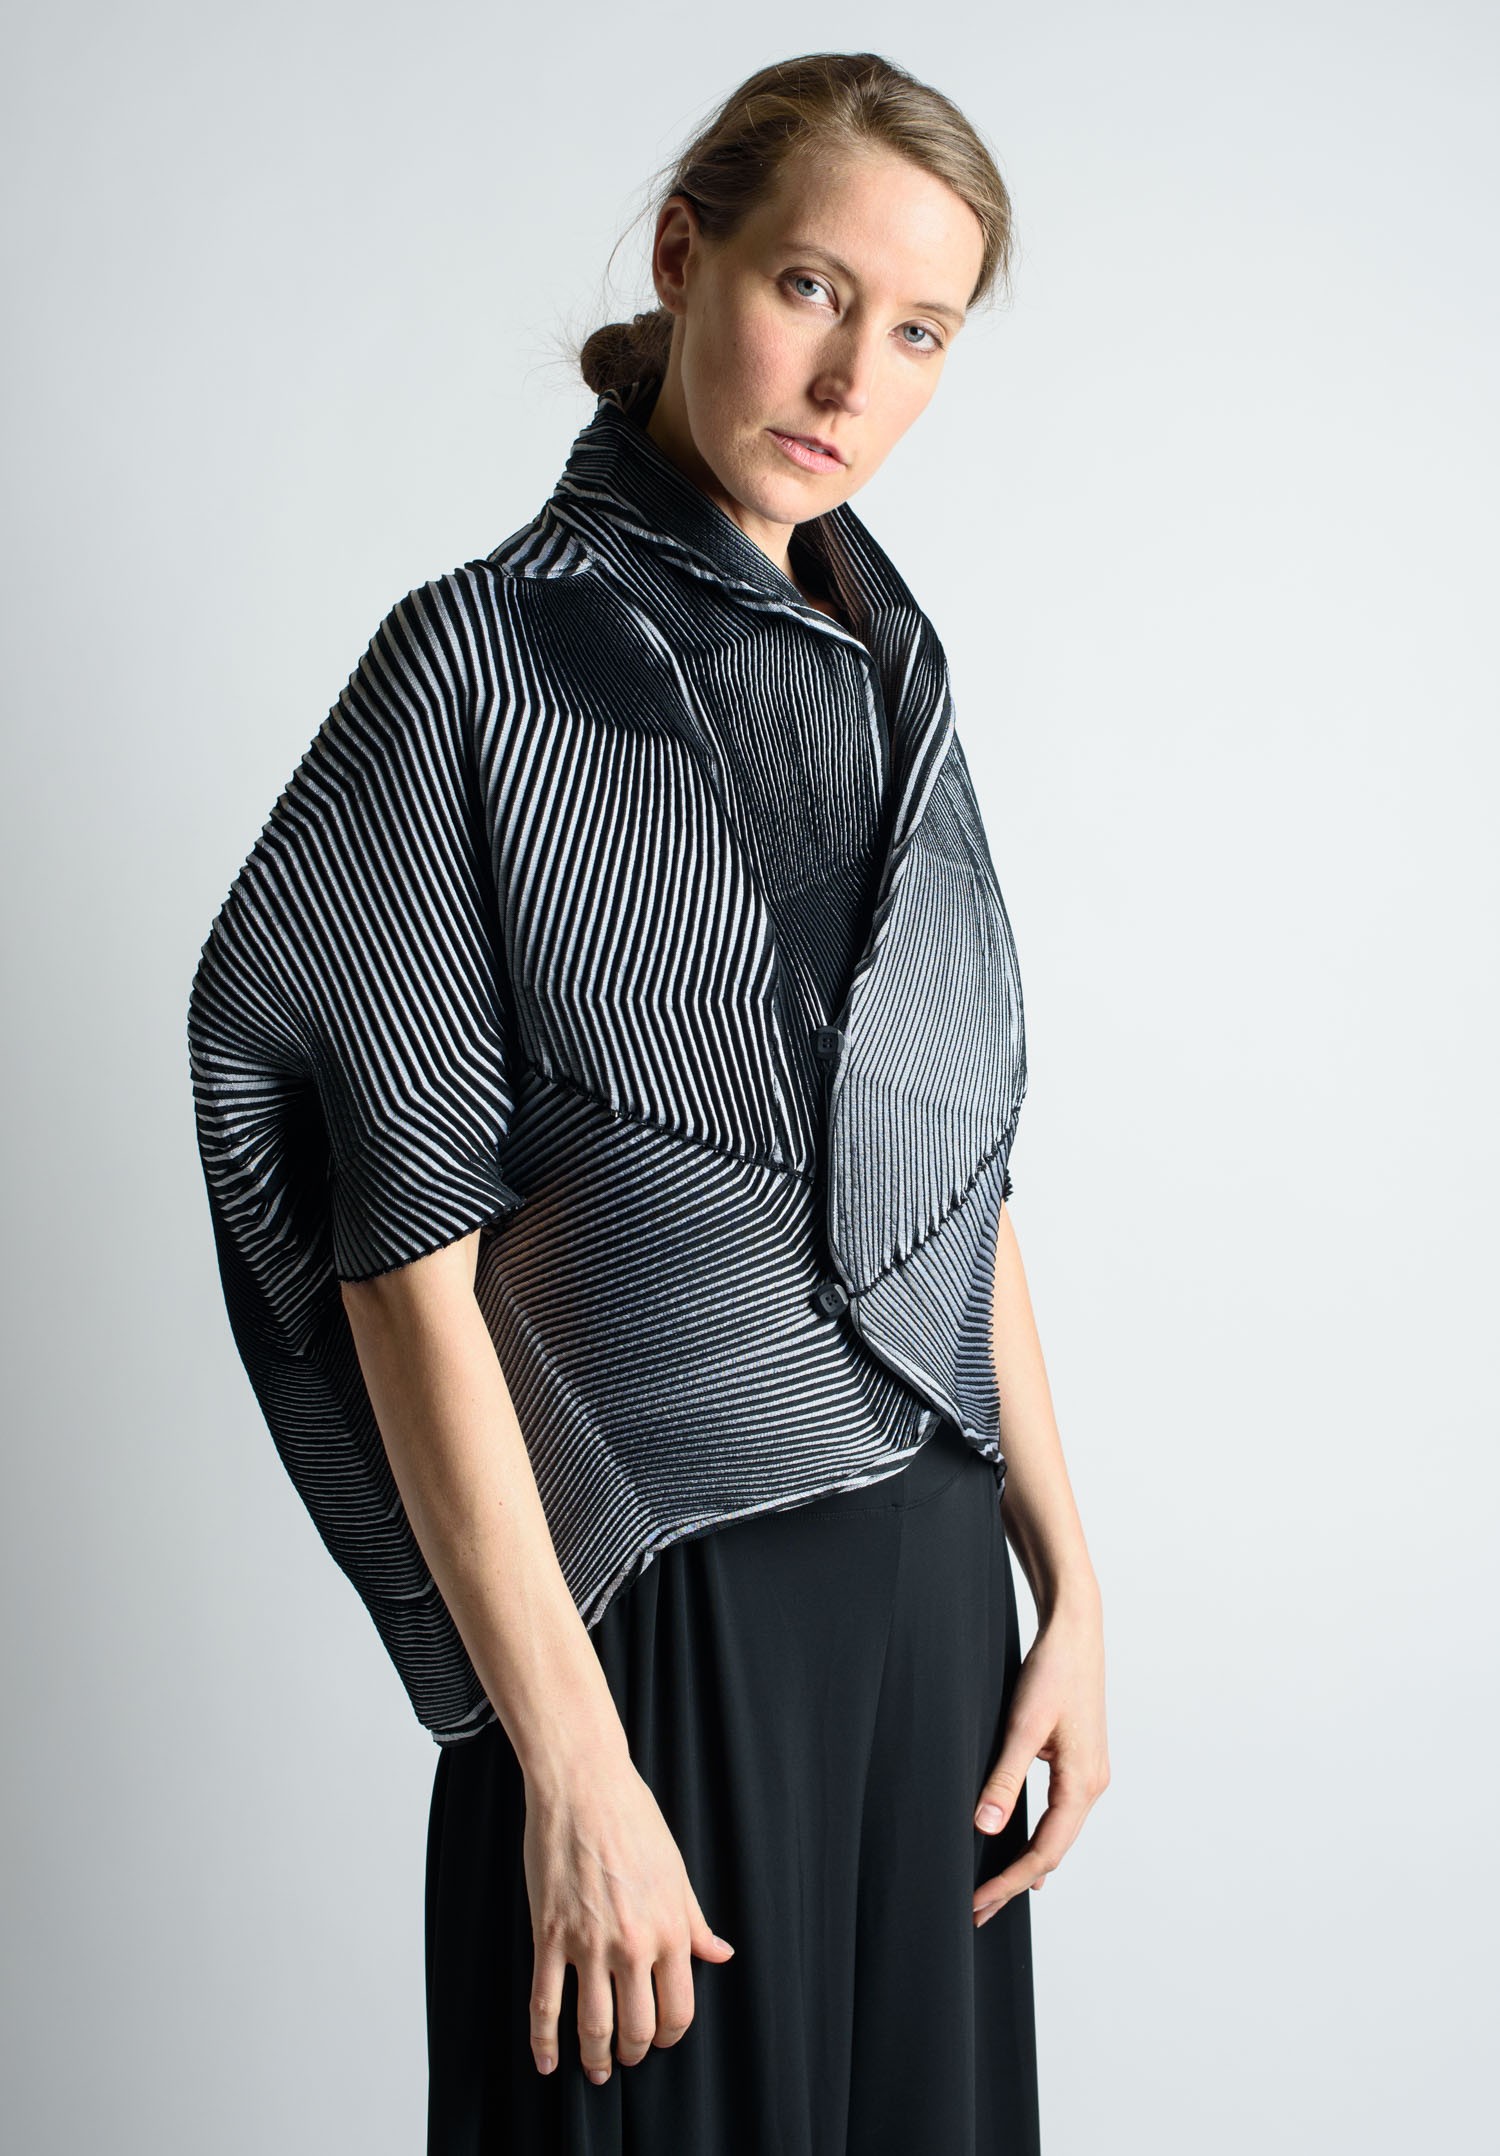 Issey Miyake Structured Pleated Cocoon Jacket in Black/Grey | Santa Fe ...